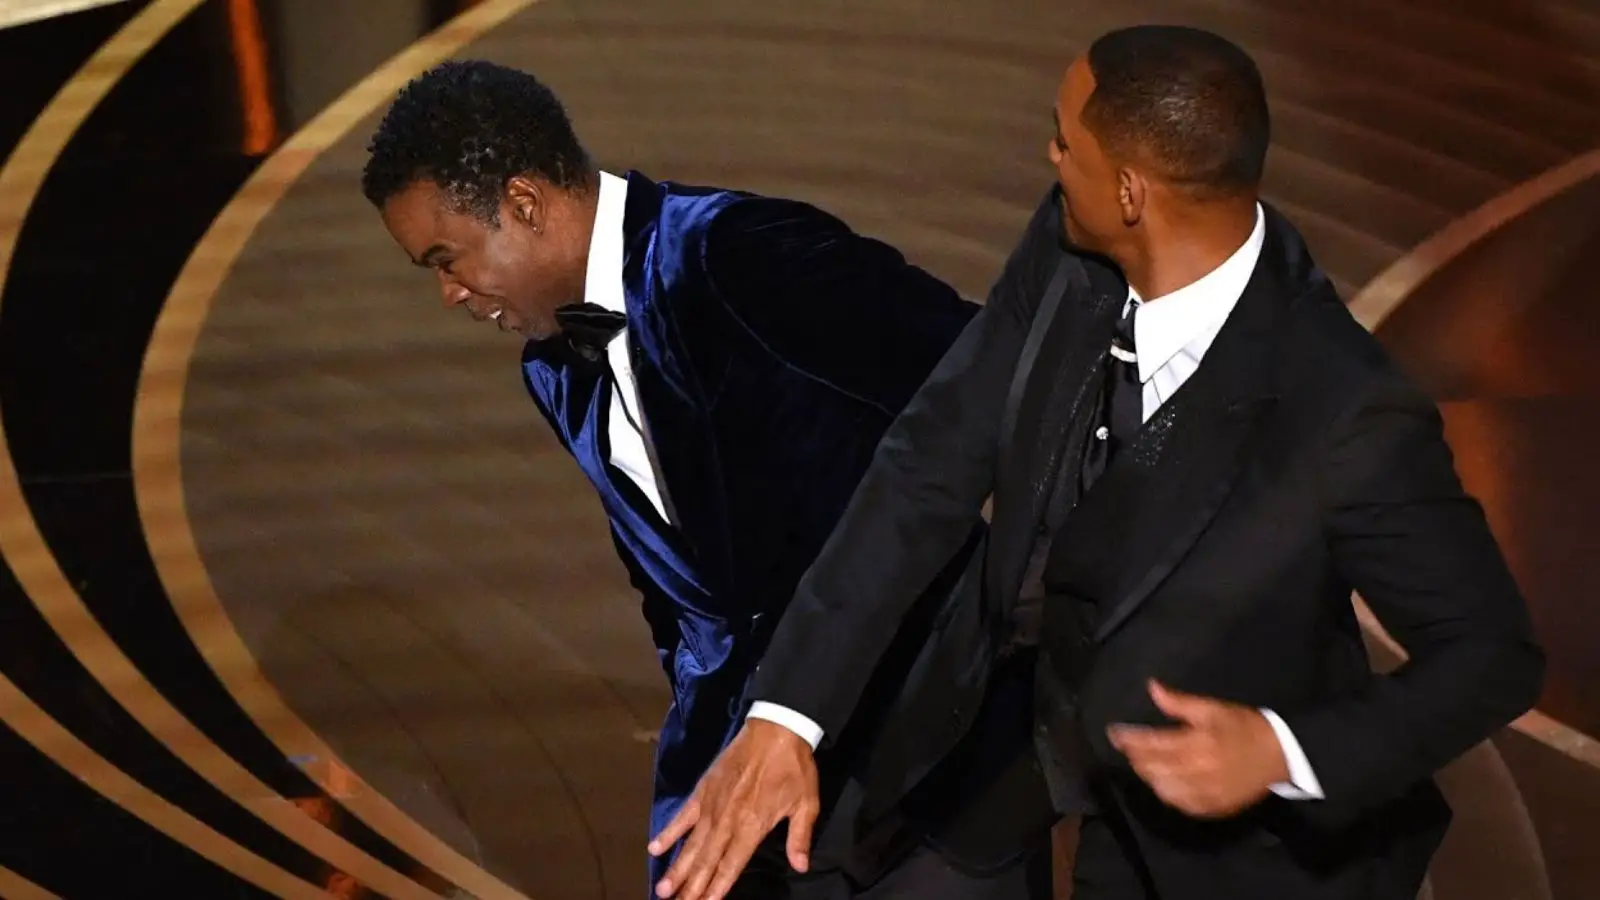 Will Smith Slapping/Punching Chris Rock - Meme Template